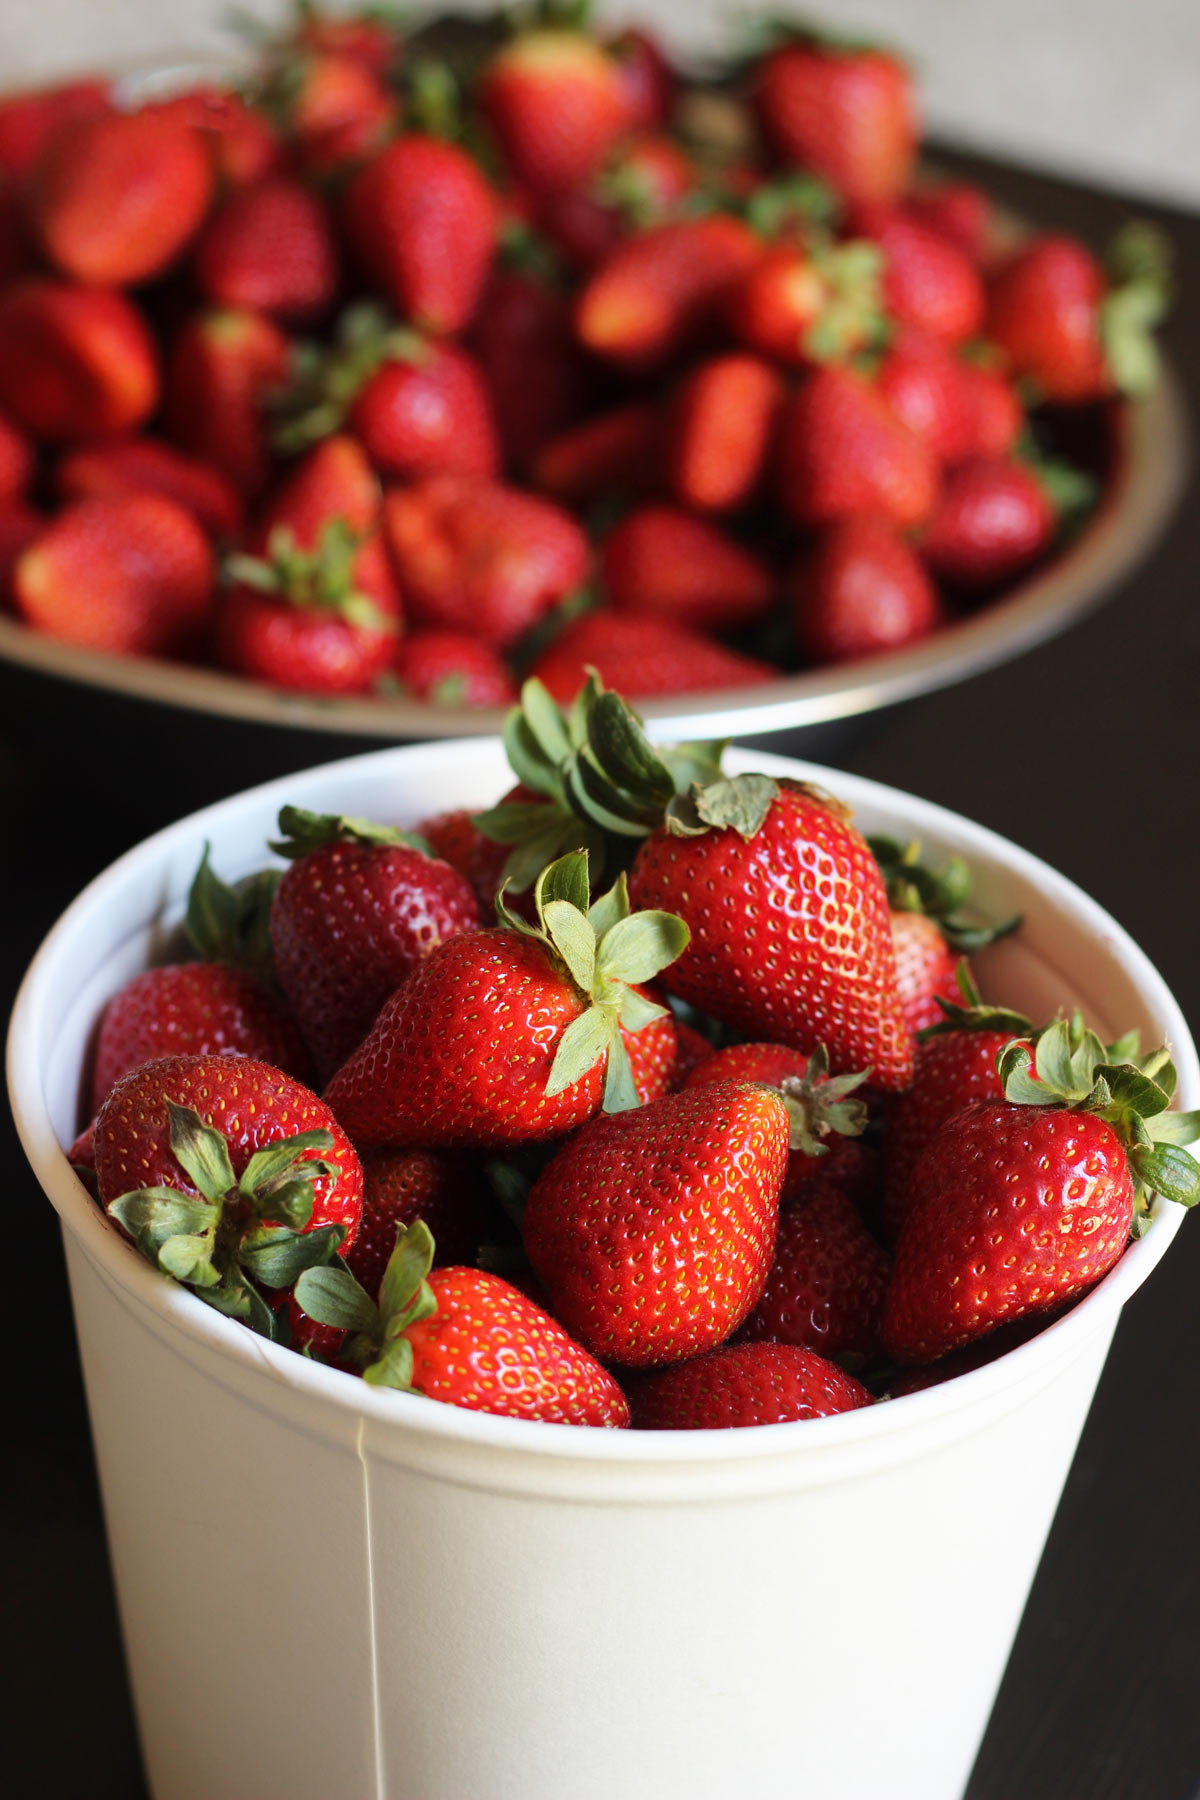 white bucket of strawberries on table next to large bowl of strawberries.